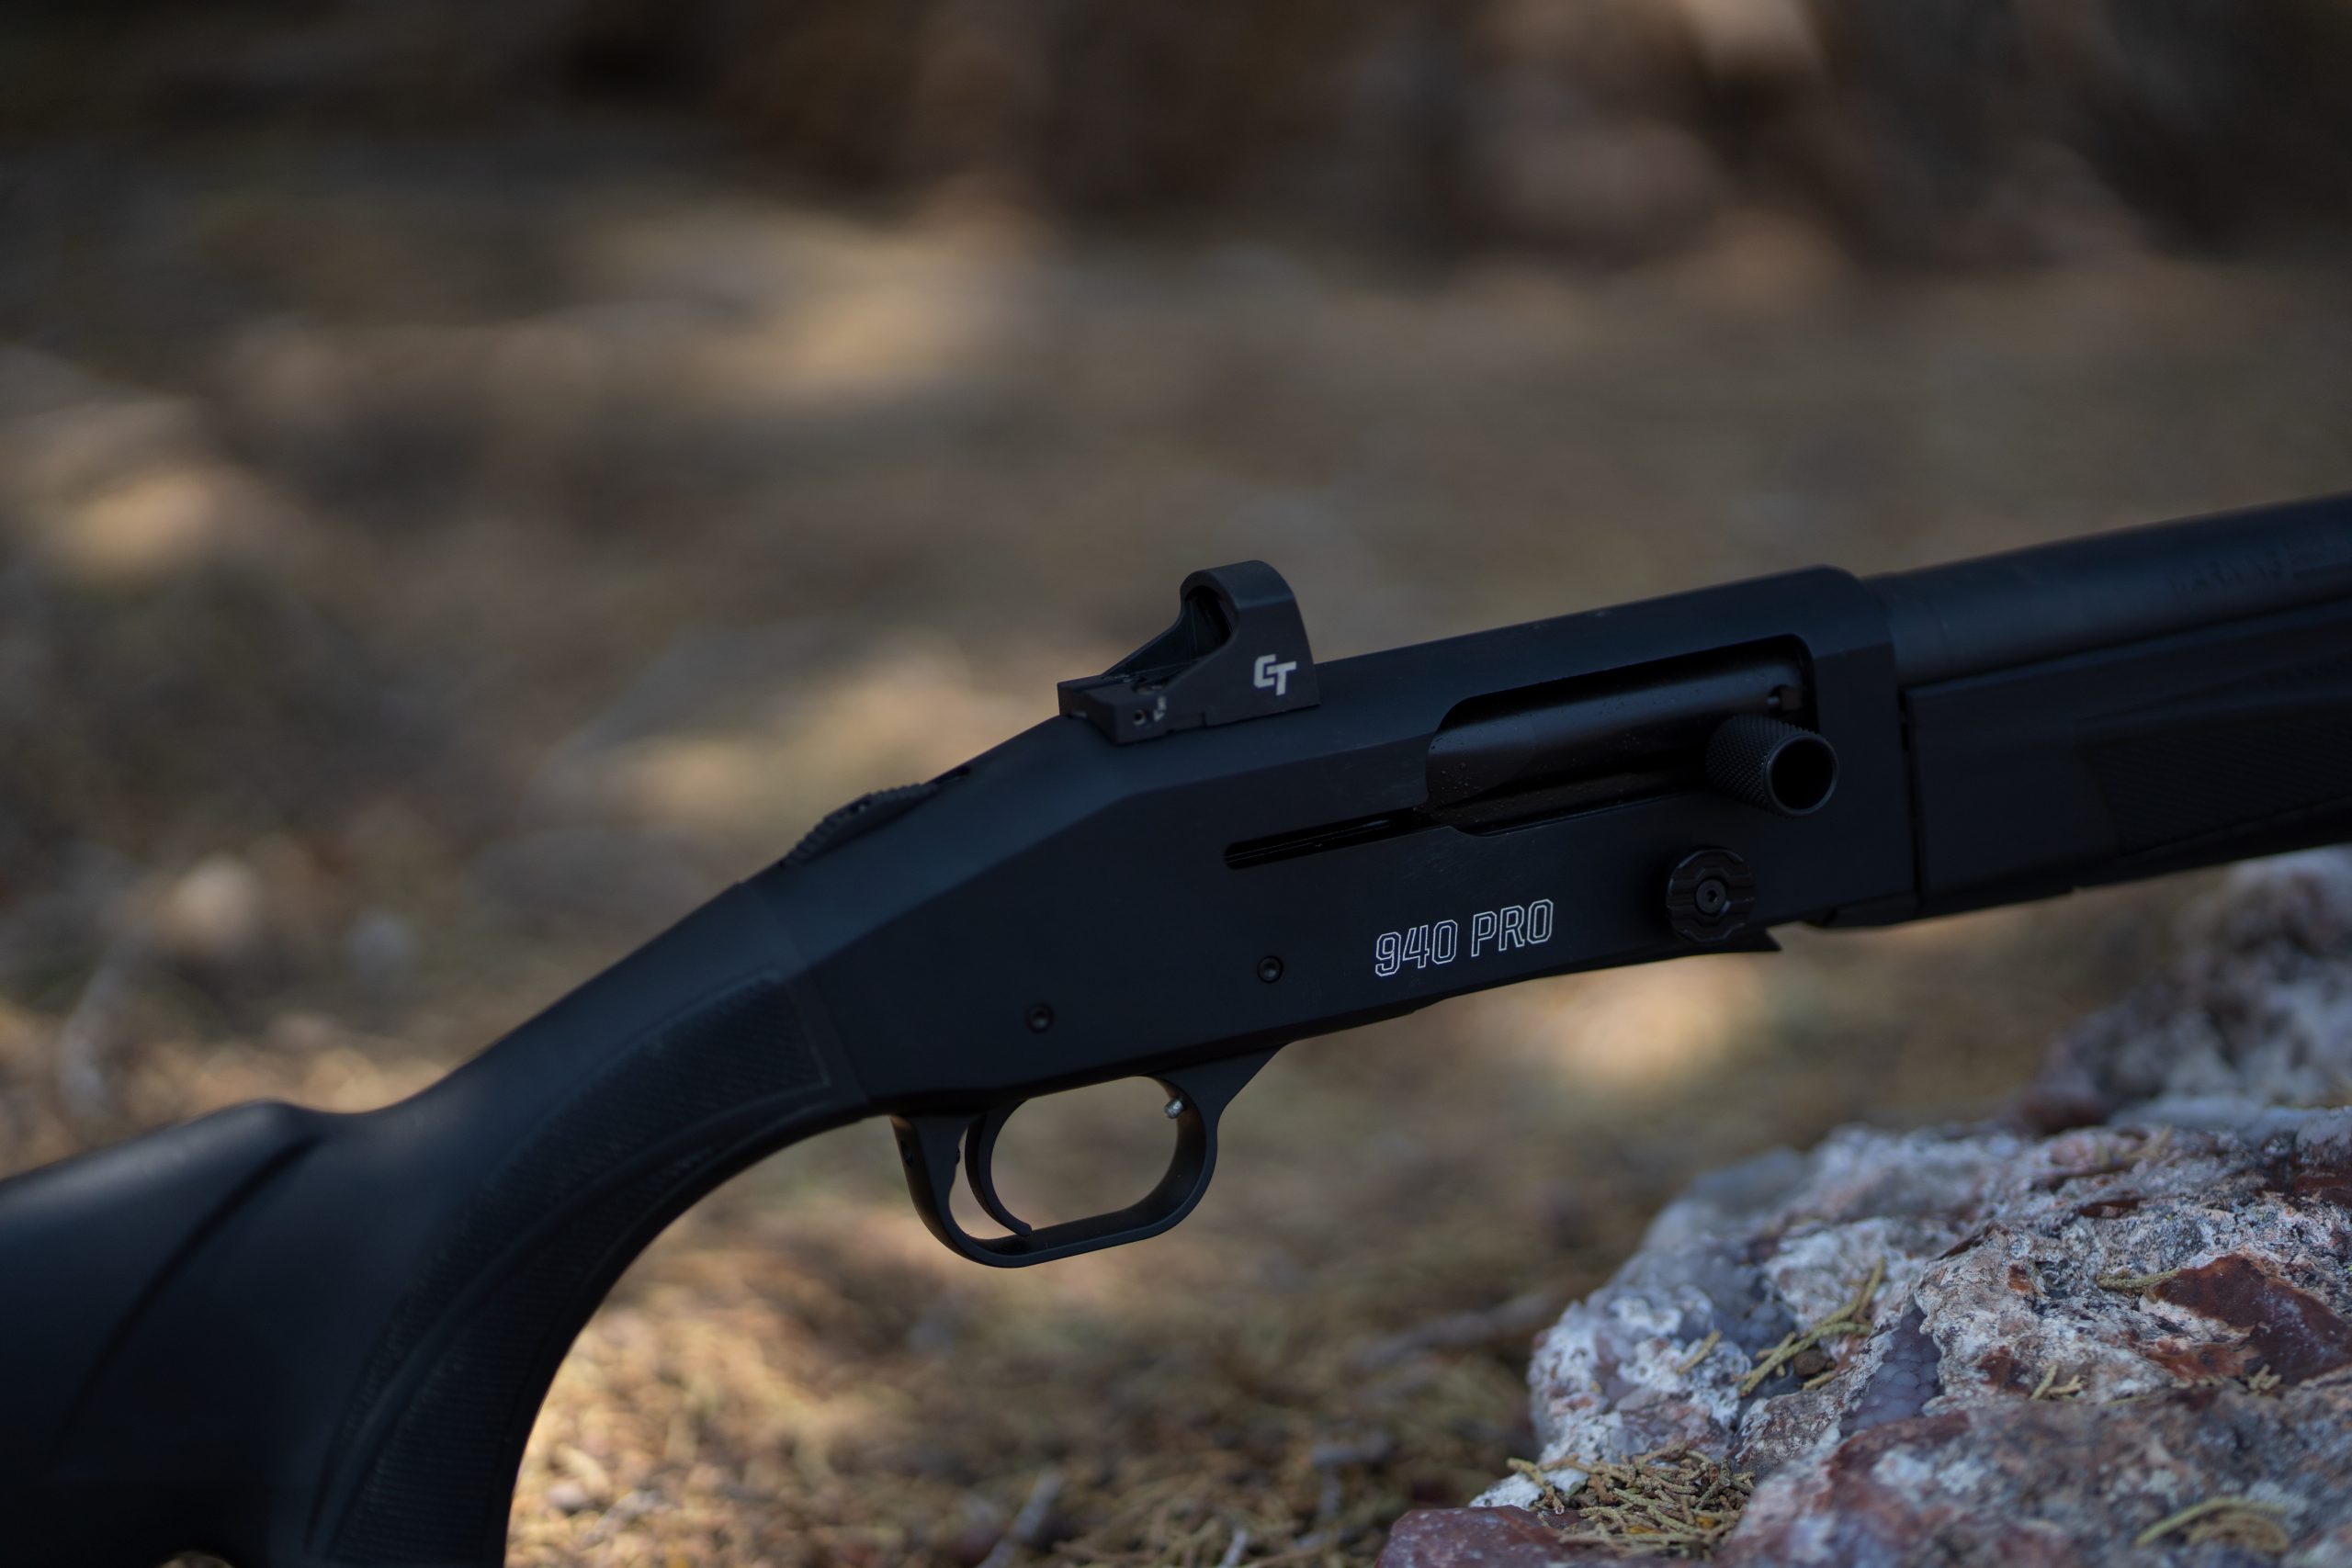 The New 940 Pro Tactical Optics-Ready Shotgun from Mossberg